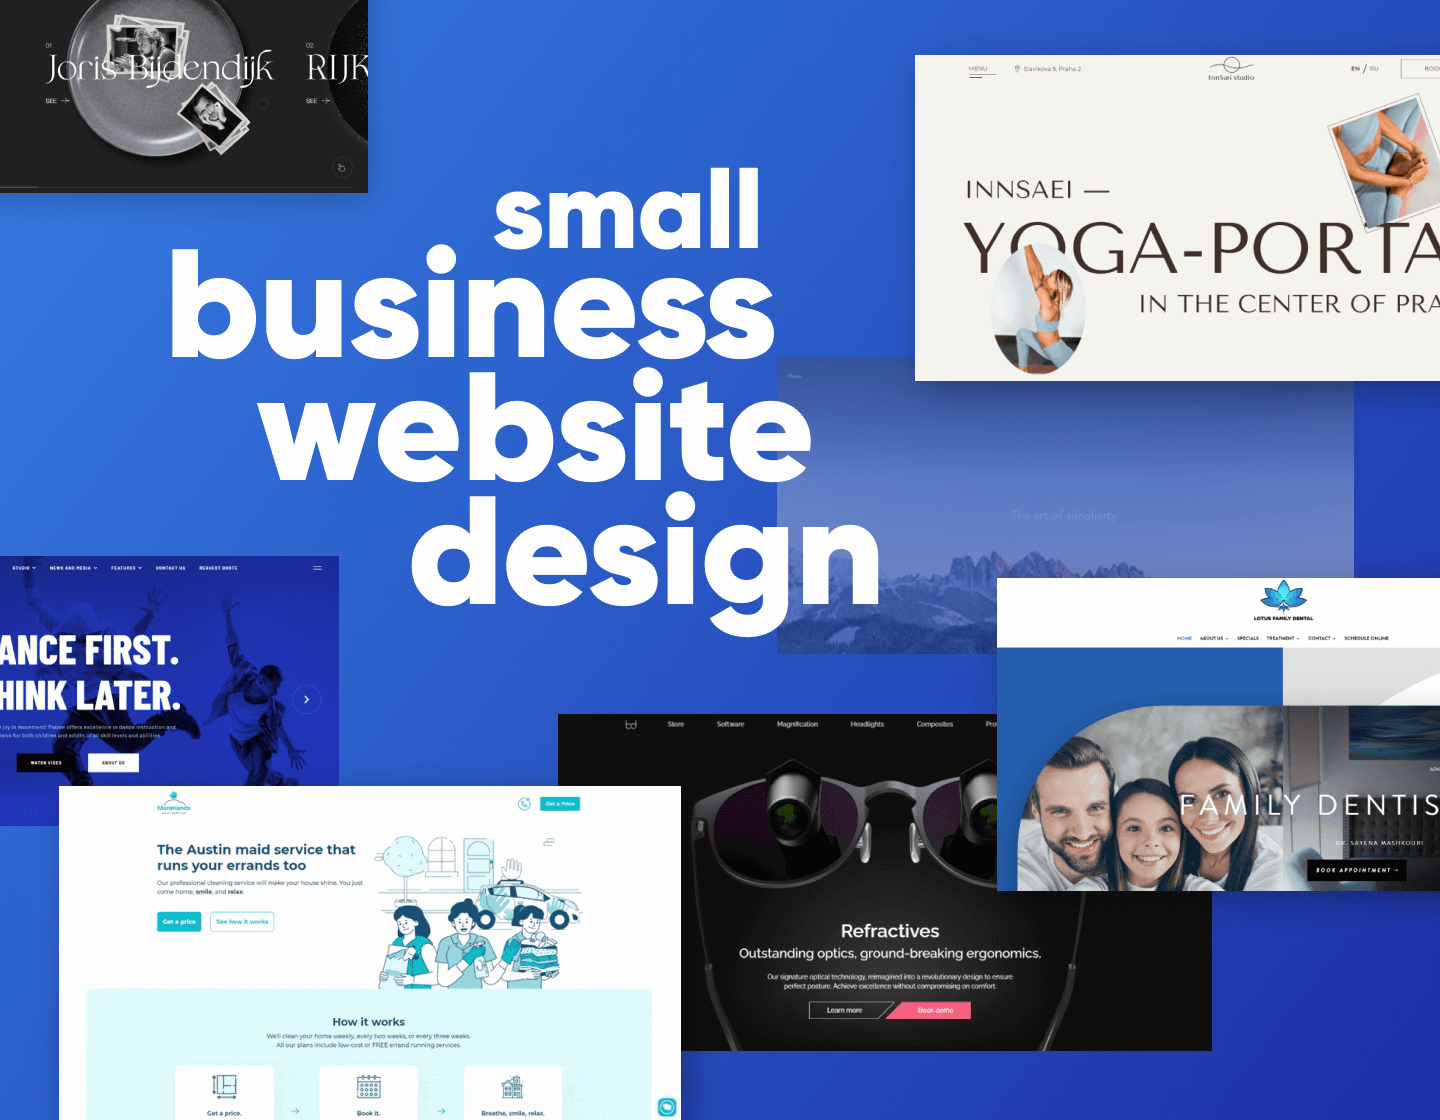 Why small business website design matters